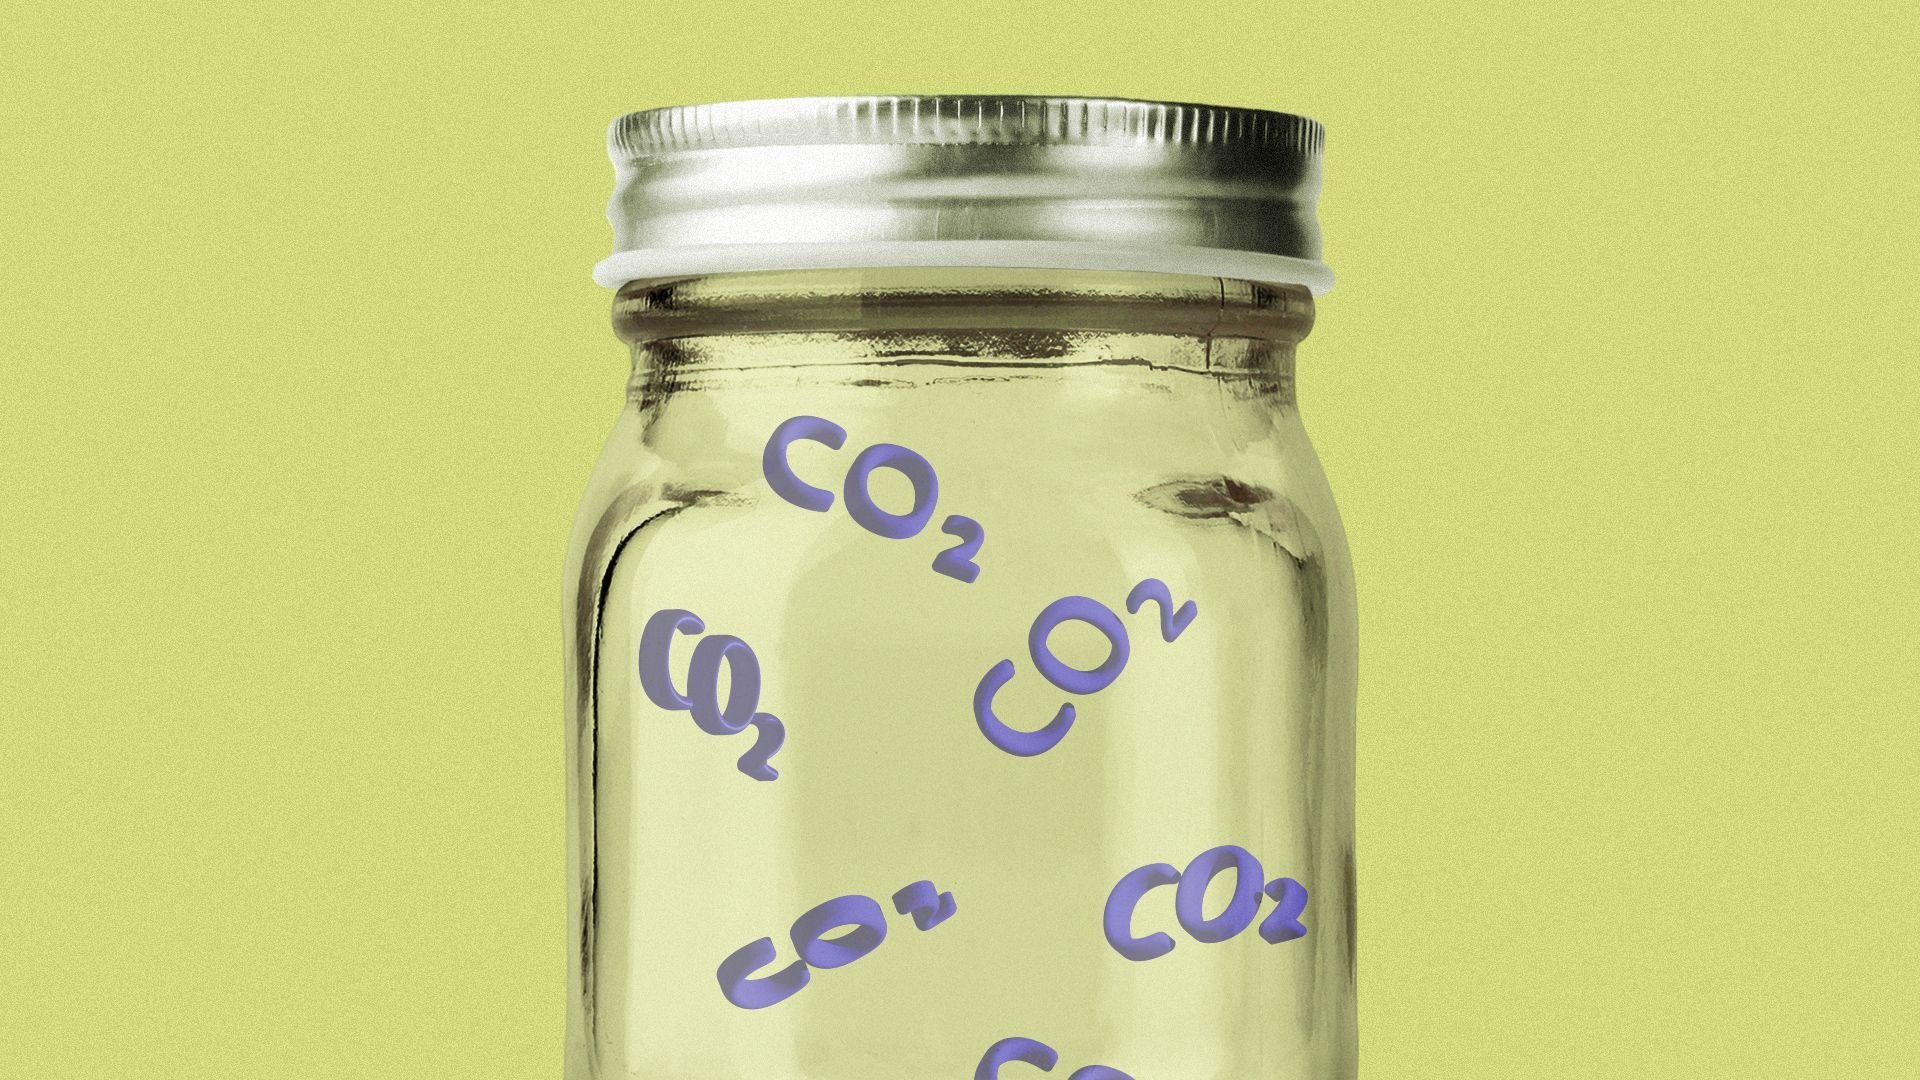 Can Carbon Removal Help Save Earth's Climate?